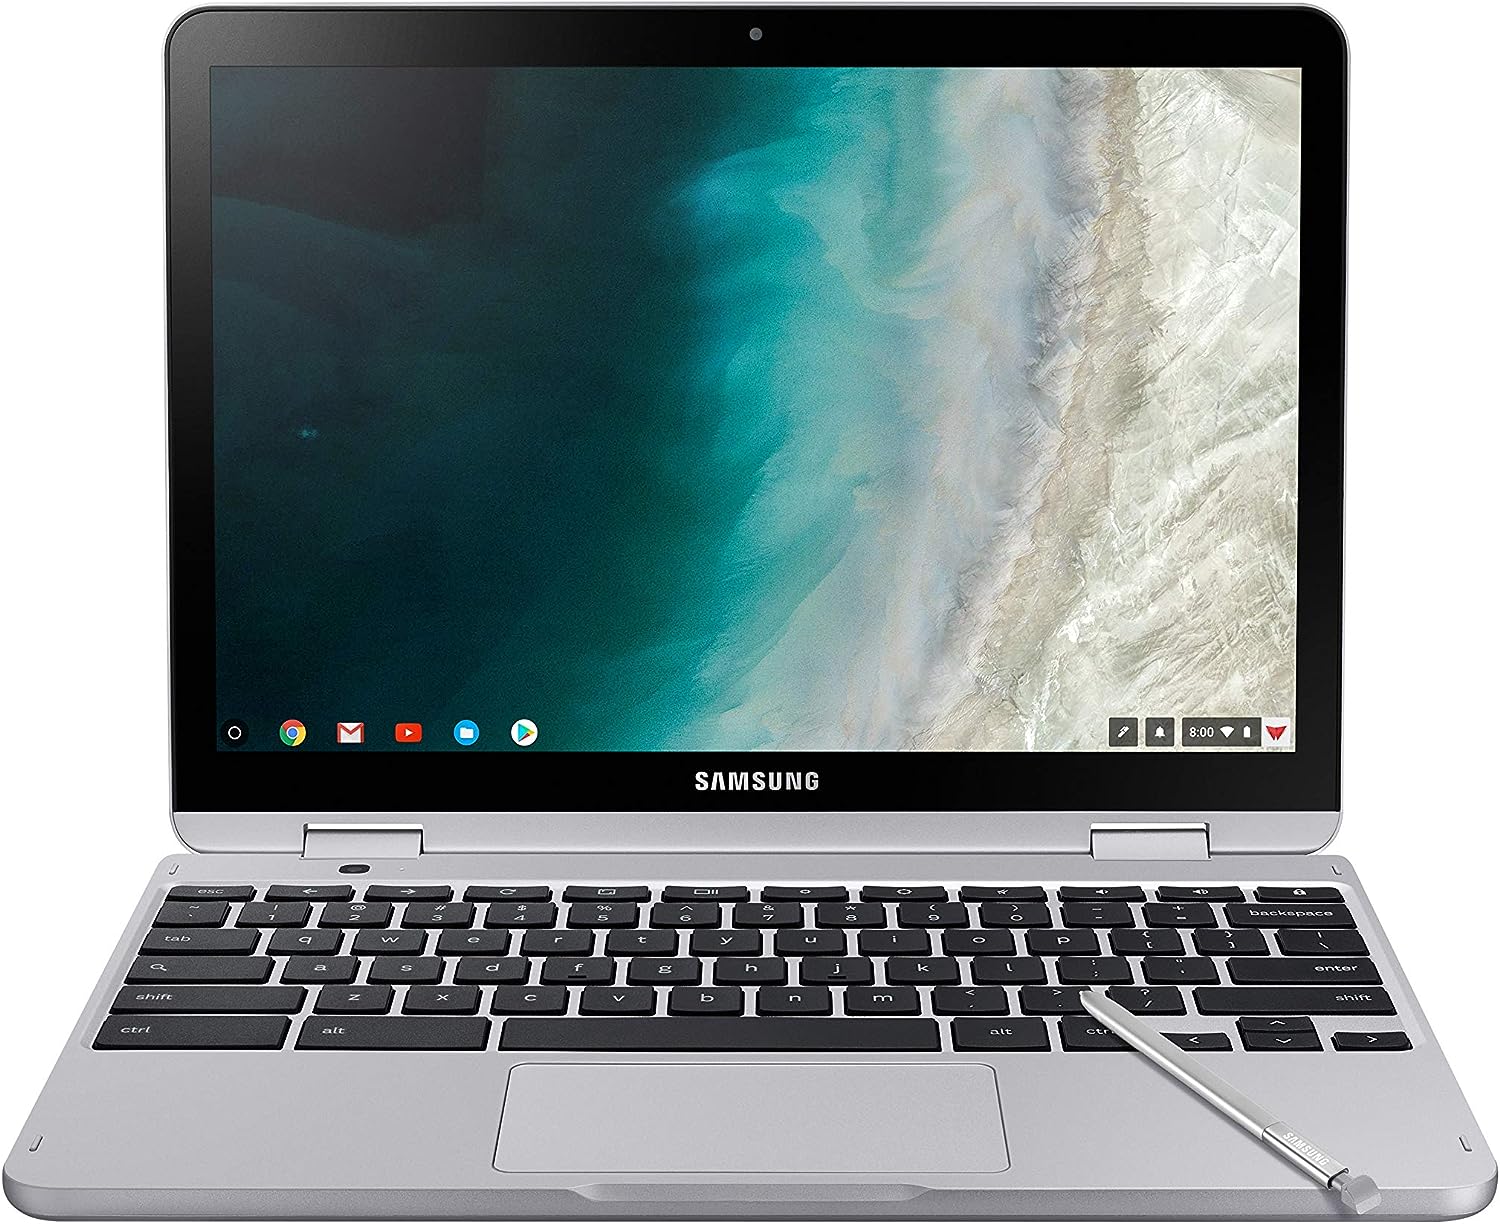 samsung laptop for photo editing detailed review